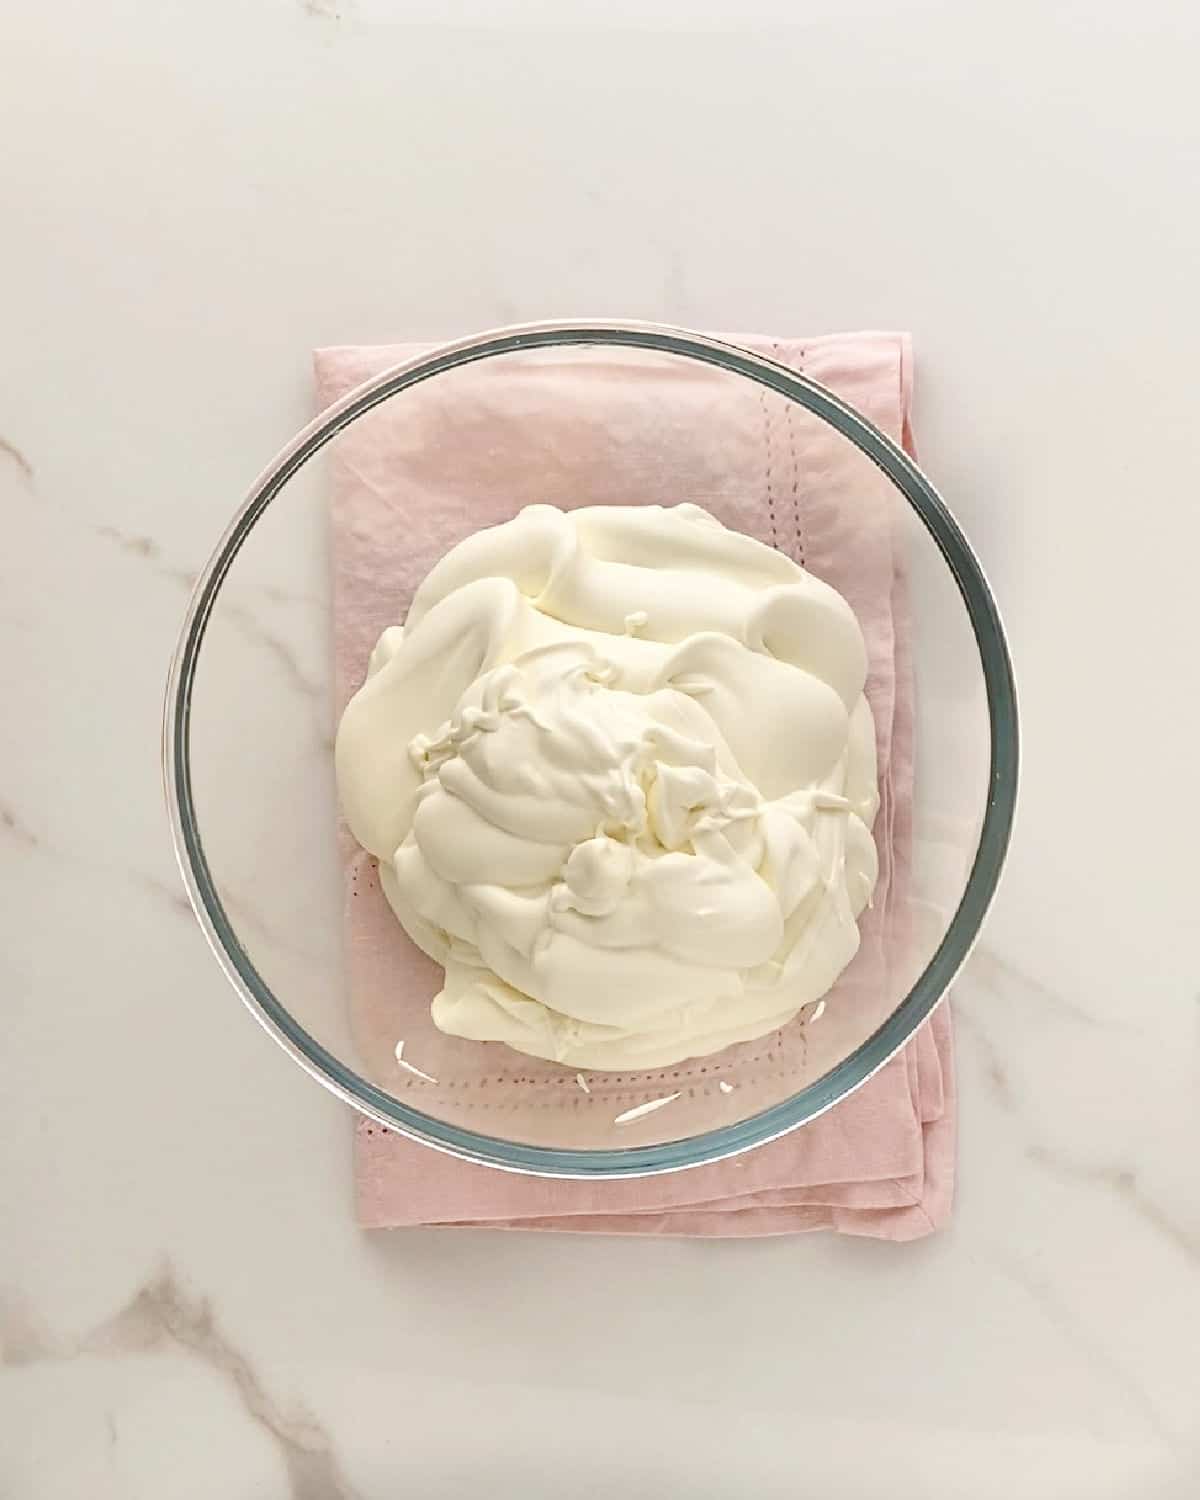 Cream mixture in a glass bowl on a pink napkin. White marble surface.